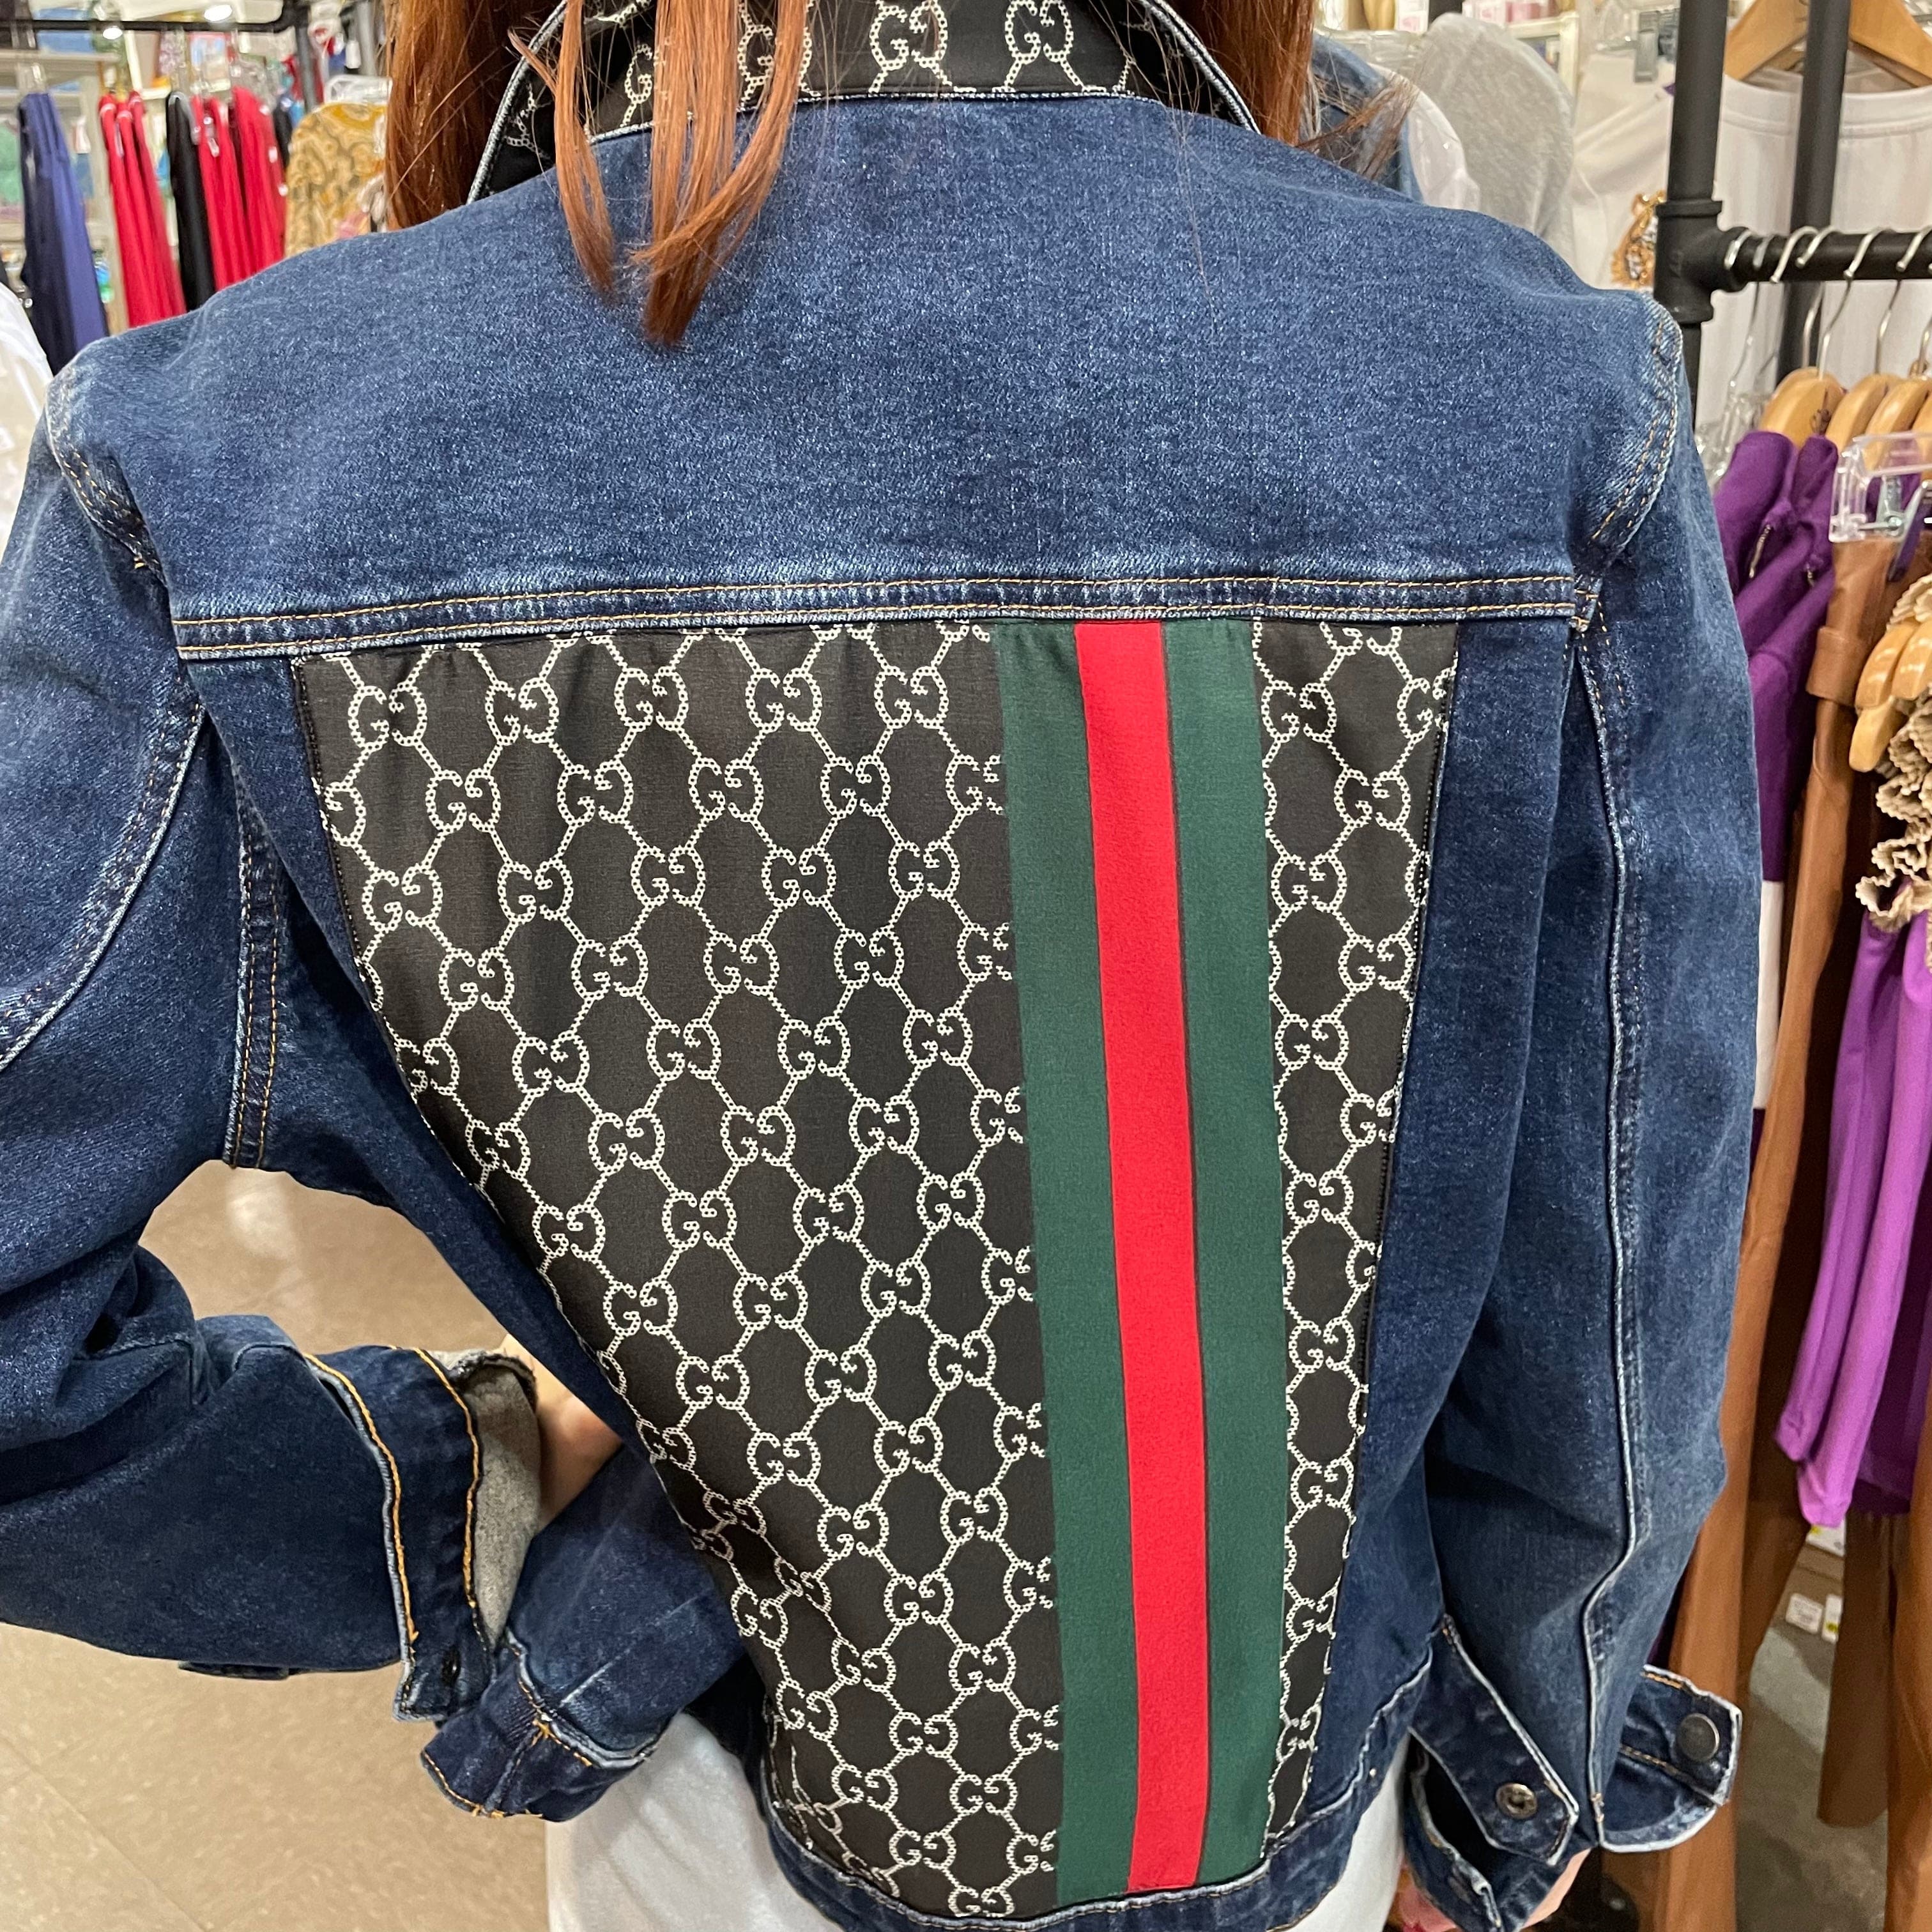 Stock up on Classic Gucci At This NYC Vintage Store